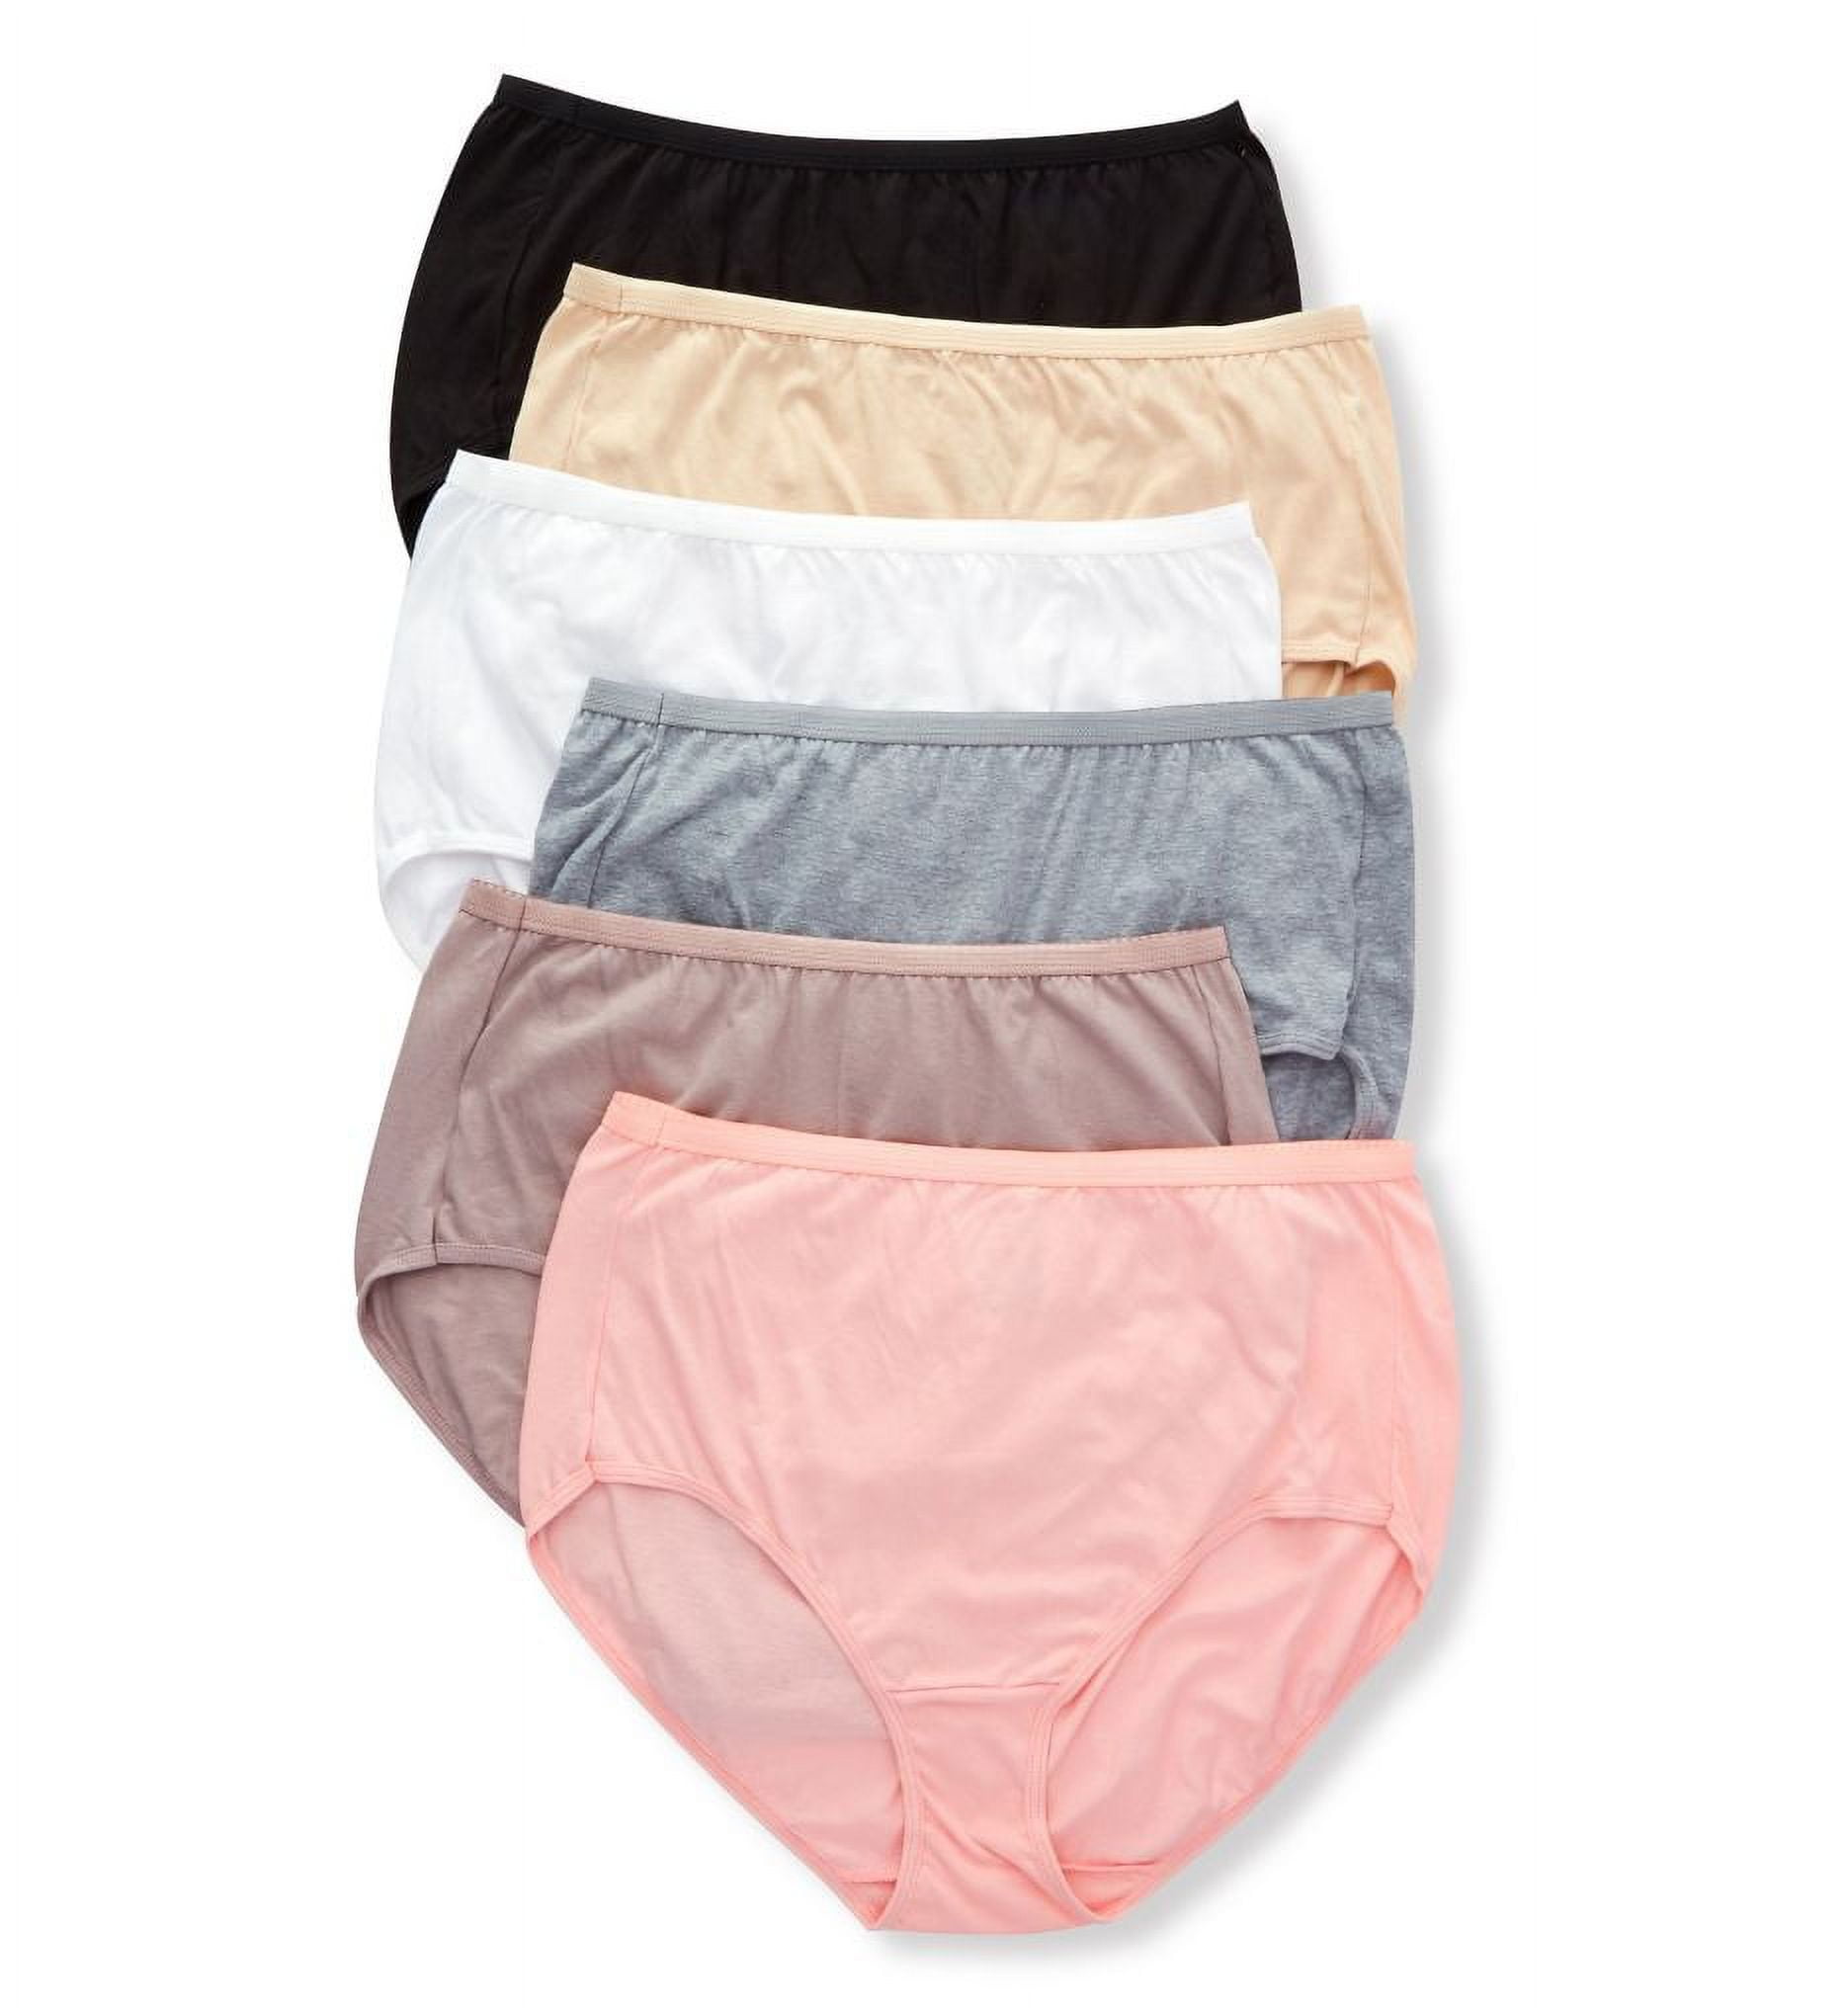 JUST MY SIZE Women's Plus Size Cool Comfort Brief 6-Pack